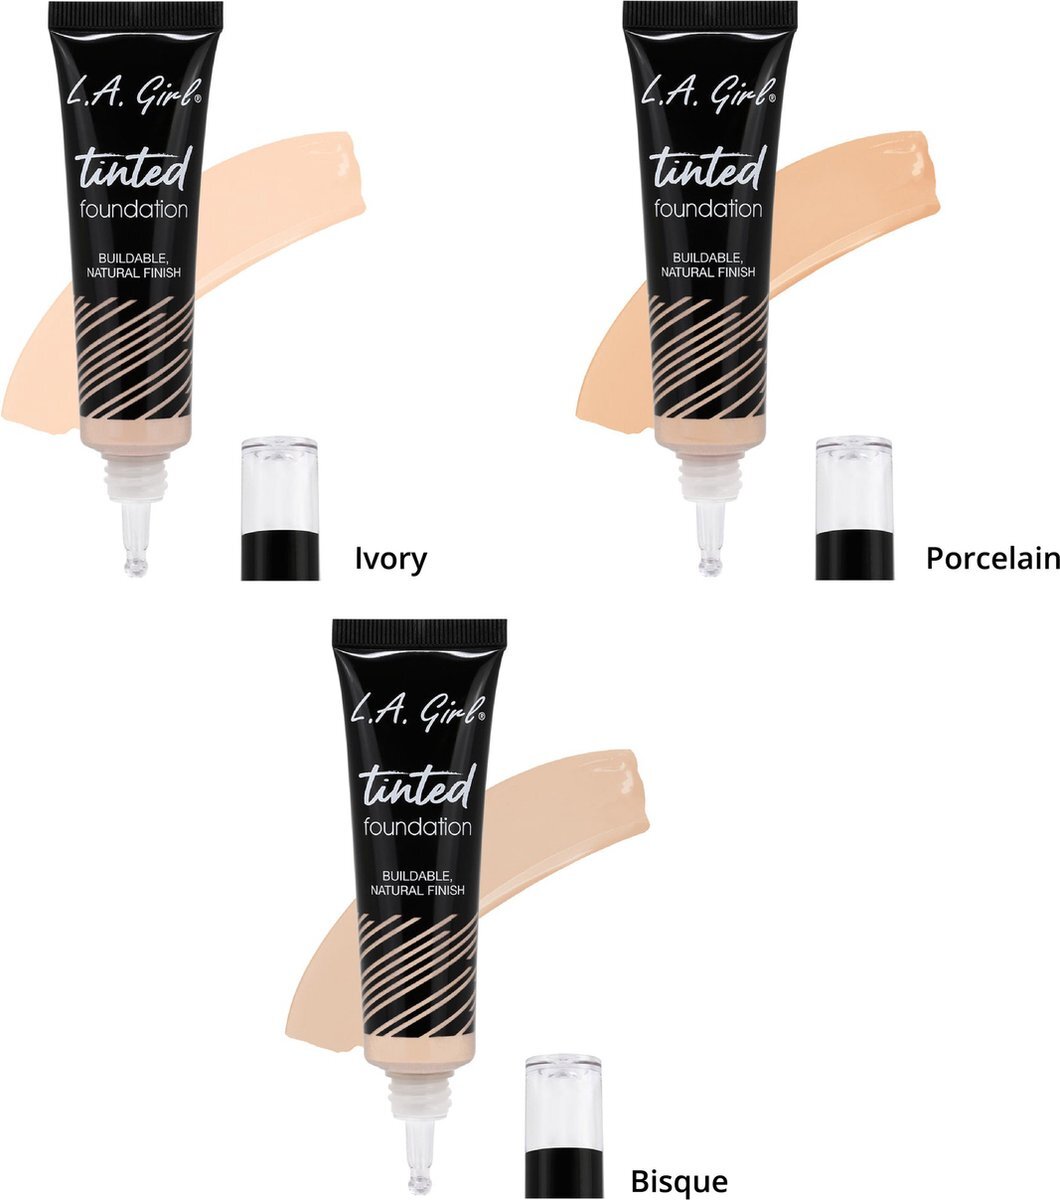 L.A. Girl - Tinted Foundation - Ivory